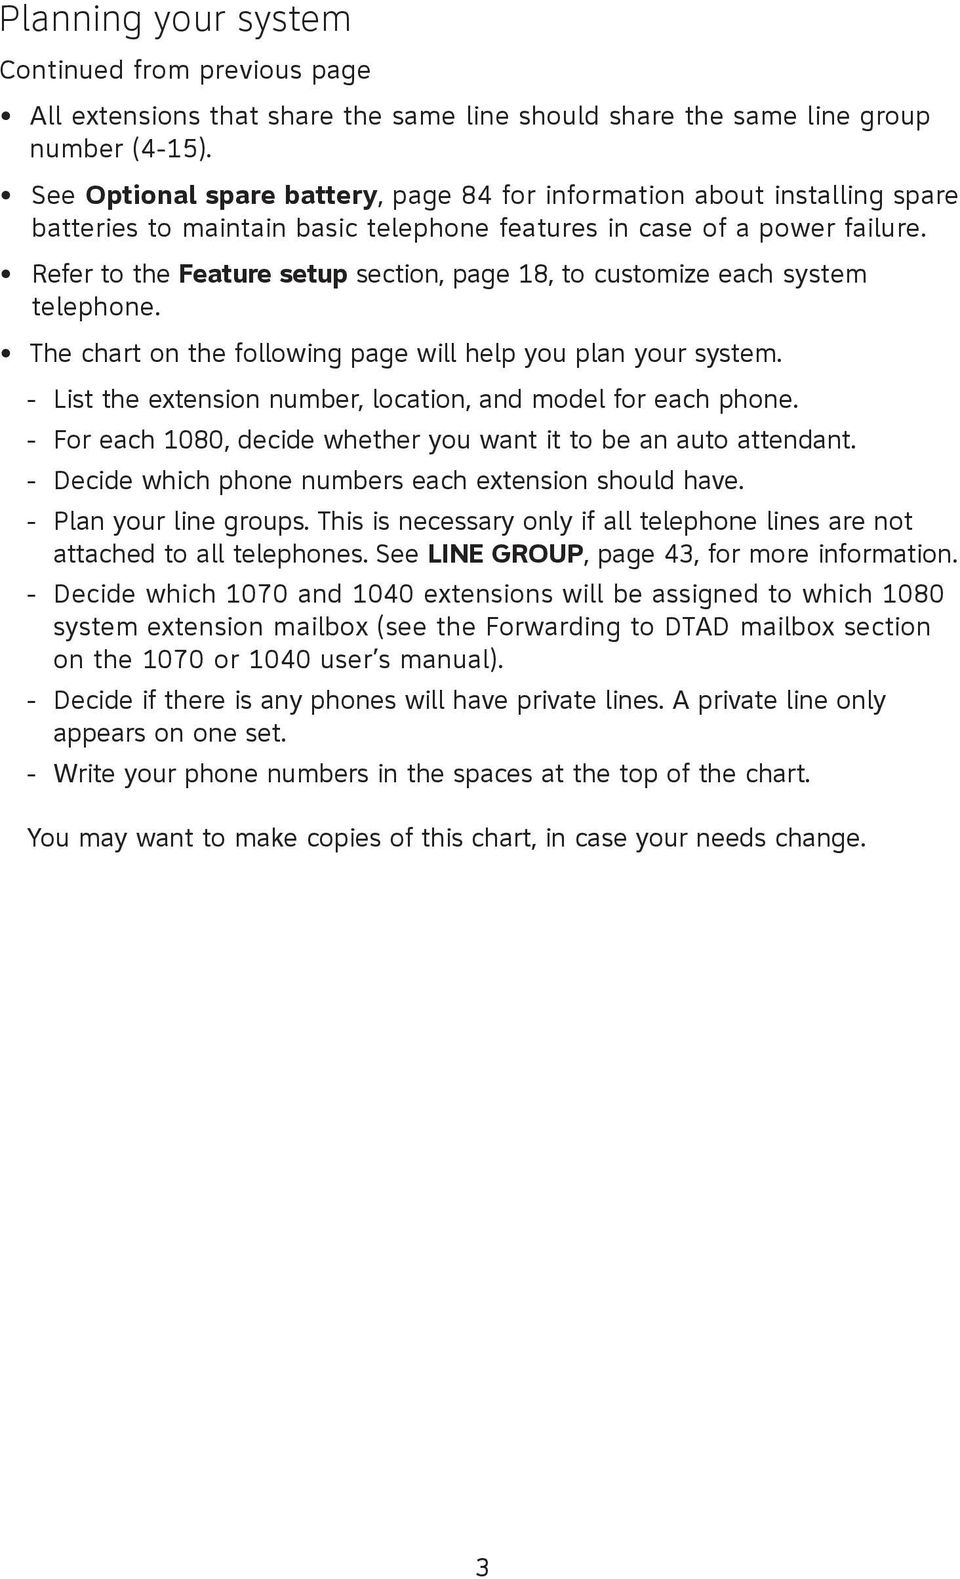 Refer to the Feature setup section, page 18, to customize each system telephone. The chart on the following page will help you plan your system.